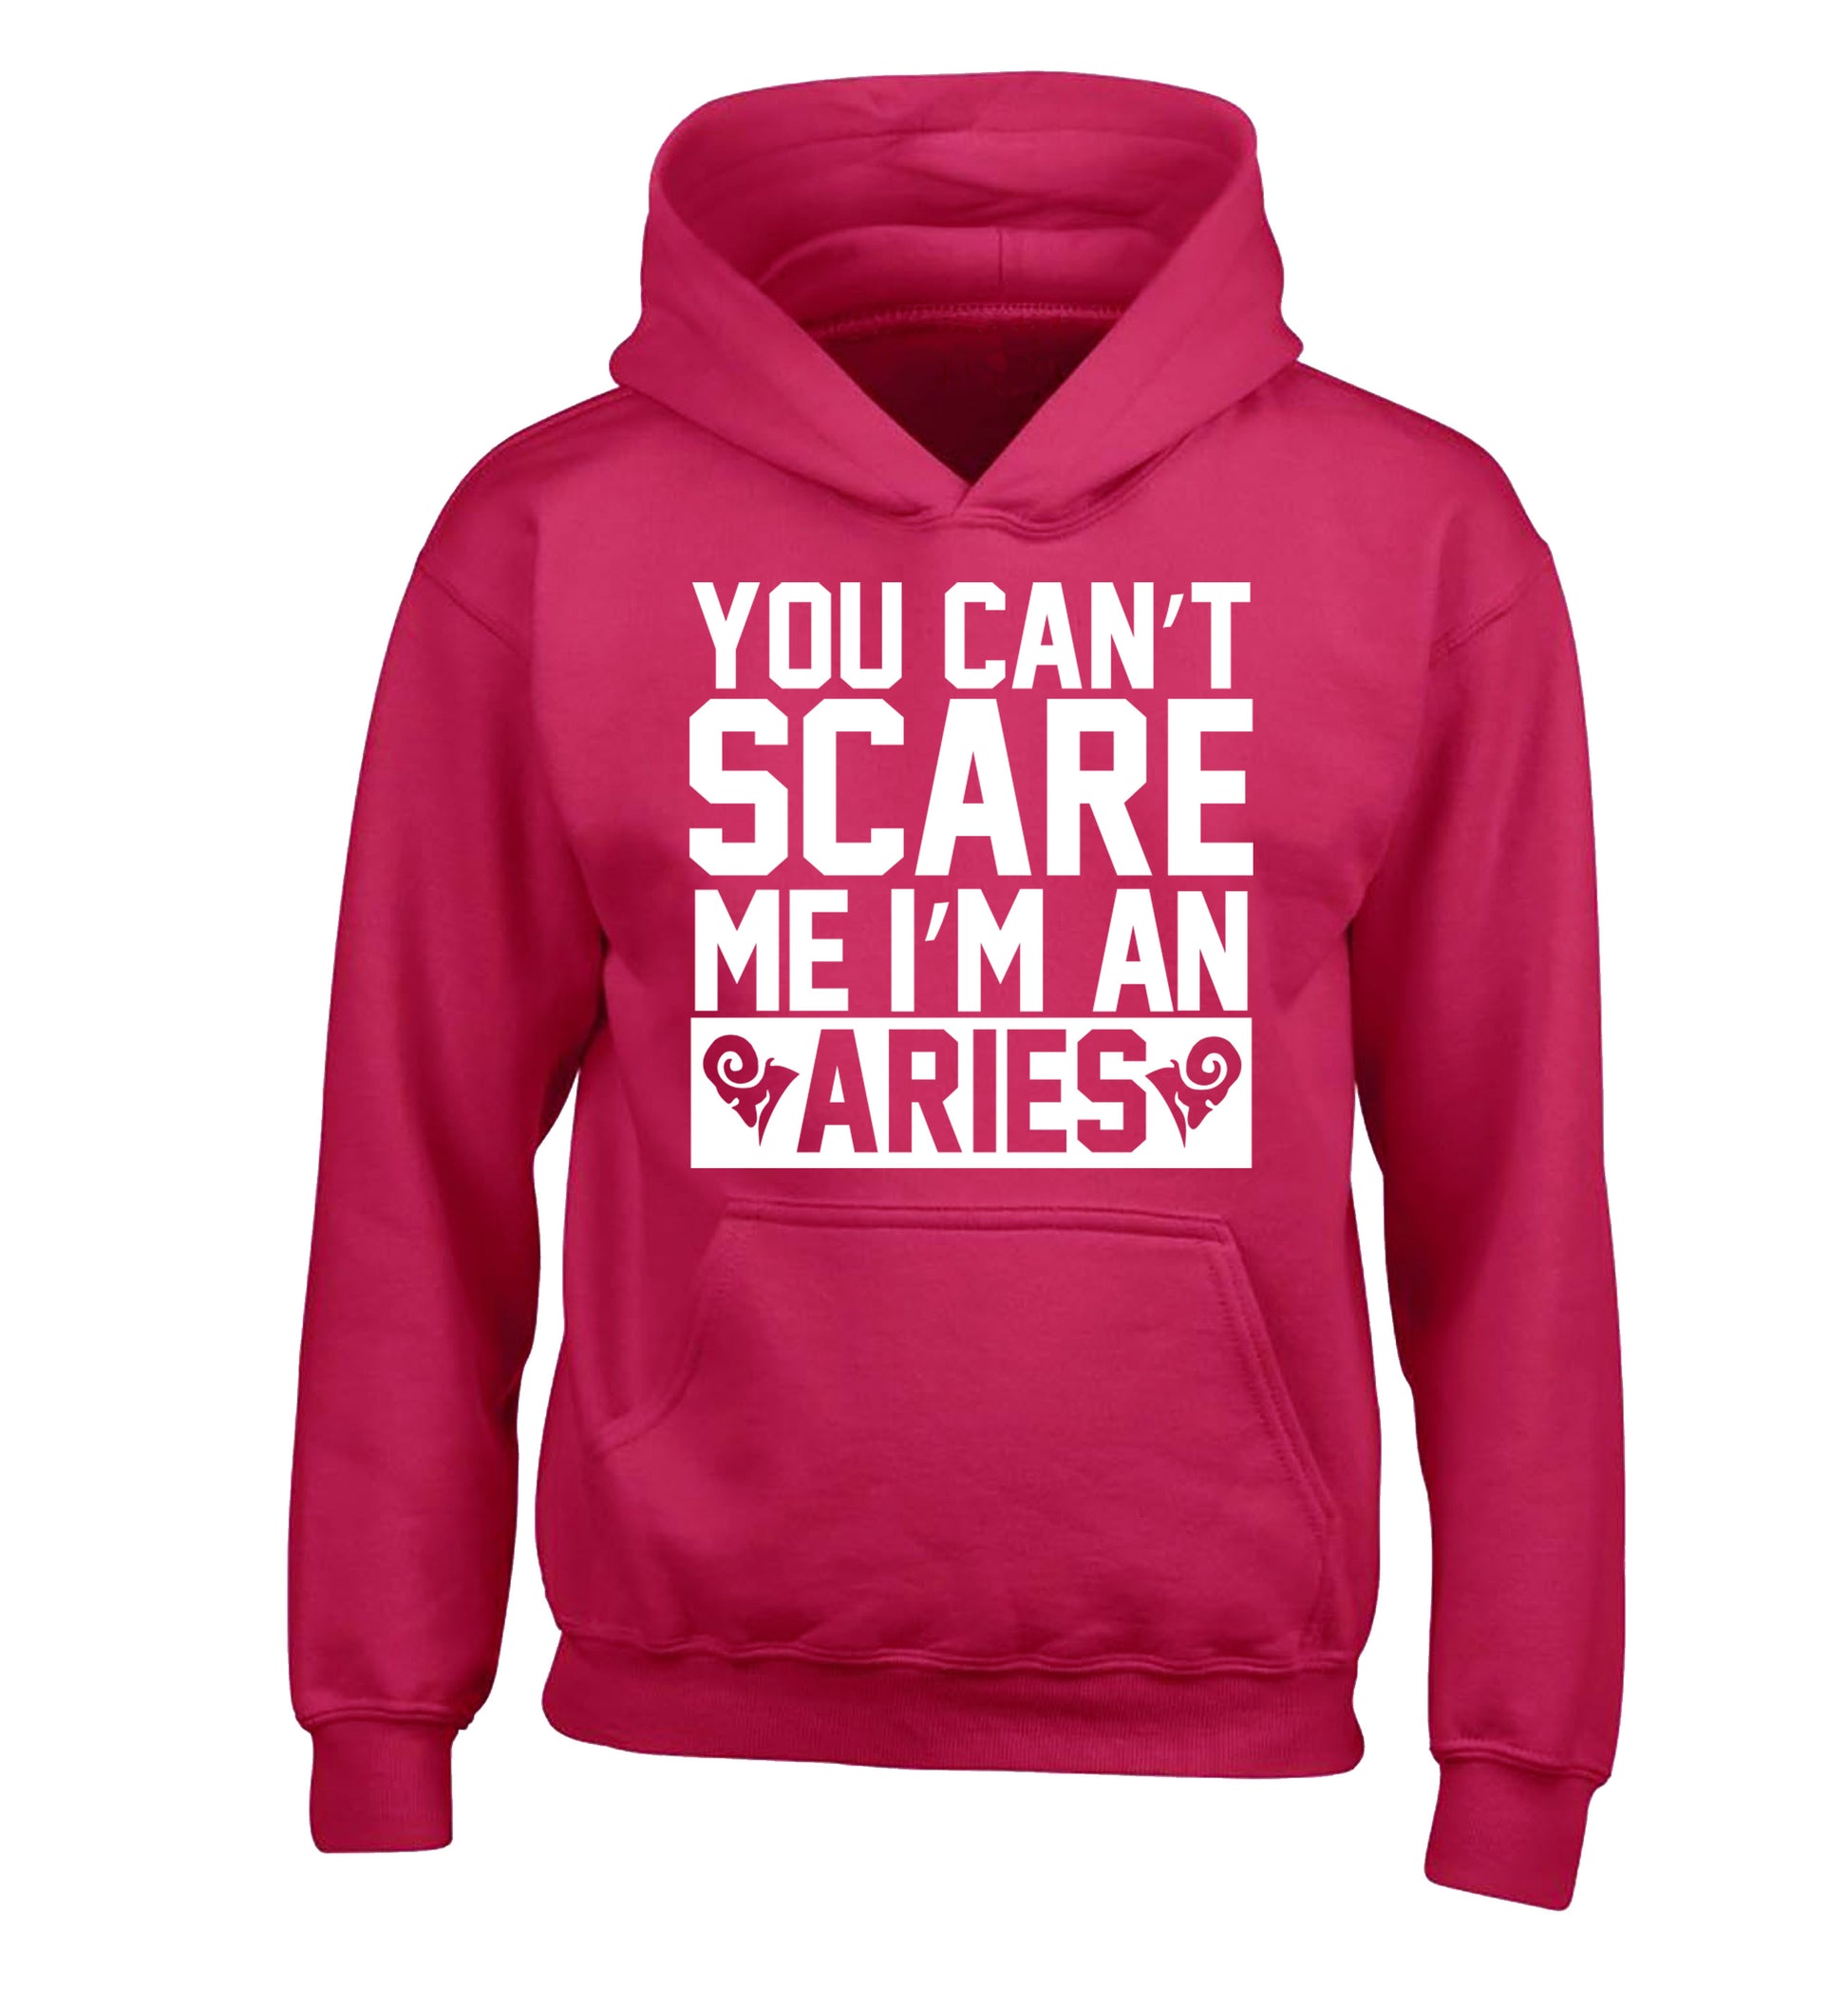 You can't scare me I'm an aries children's pink hoodie 12-13 Years